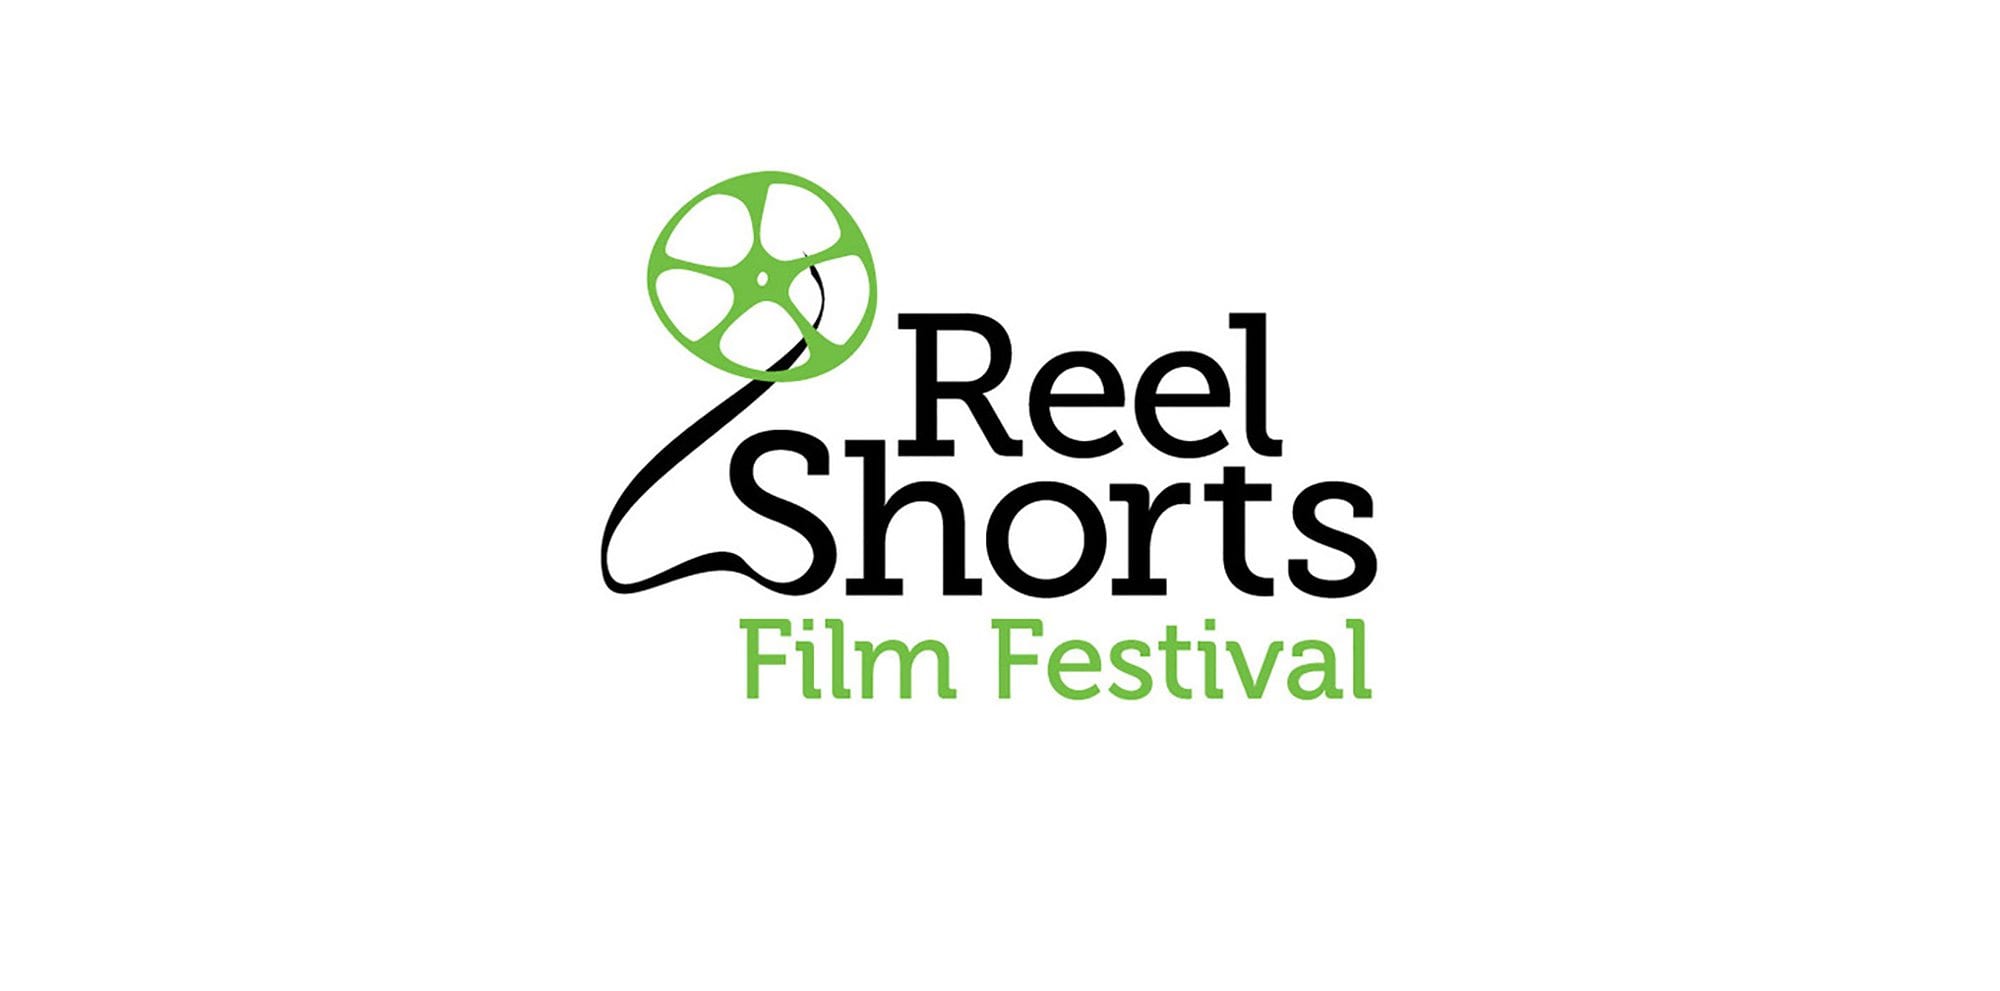 After a burst of inspiration at the Edmonton International Film Festival where Reel Shorts founder Terry Scerbak felt compelled to share some of the phenomenal short films she saw, Reel Shorts was born.